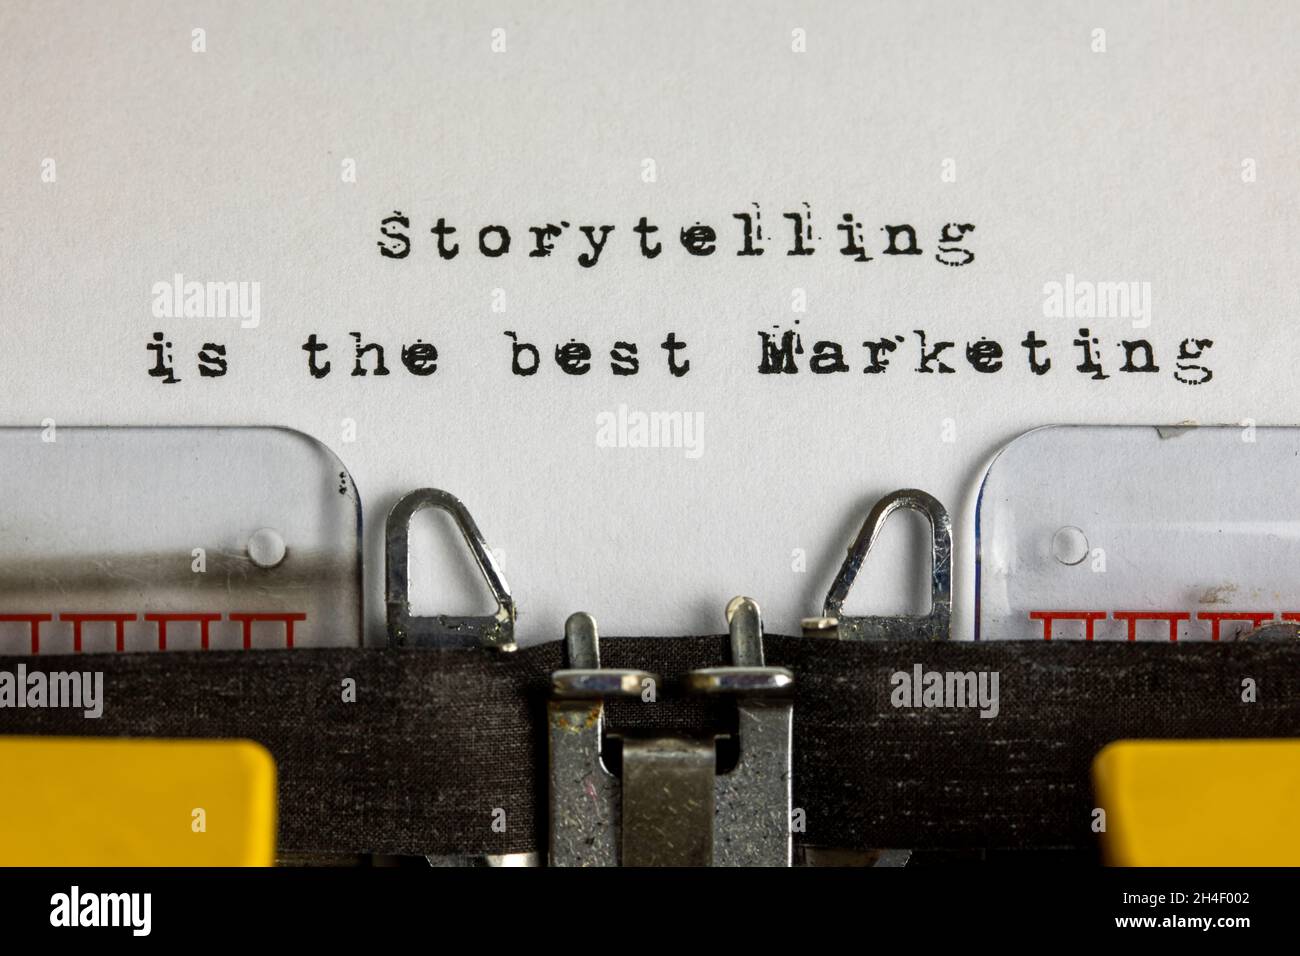 Storytelling is the best market written on an old typewriter Stock Photo